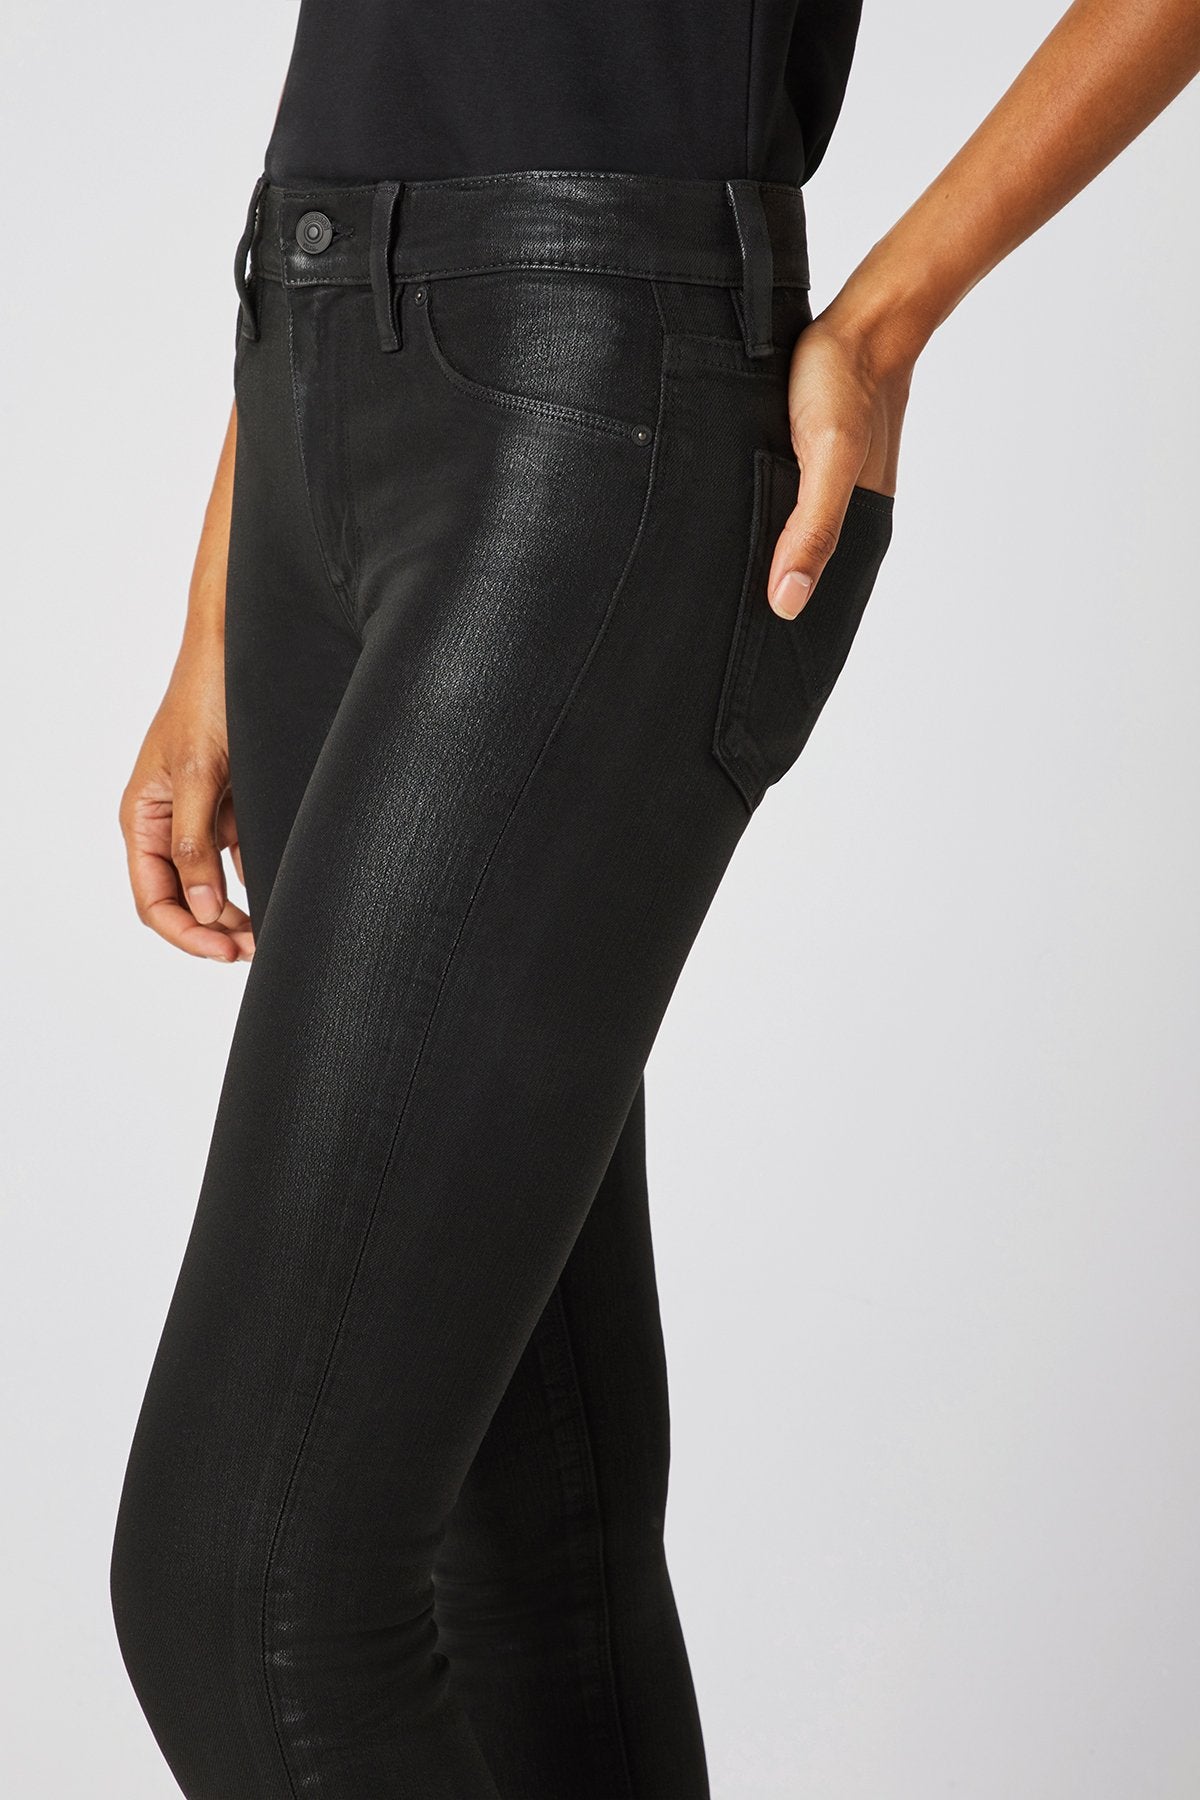 7 For All Mankind High Rise Ankle Skinny Jeans in Black Coated